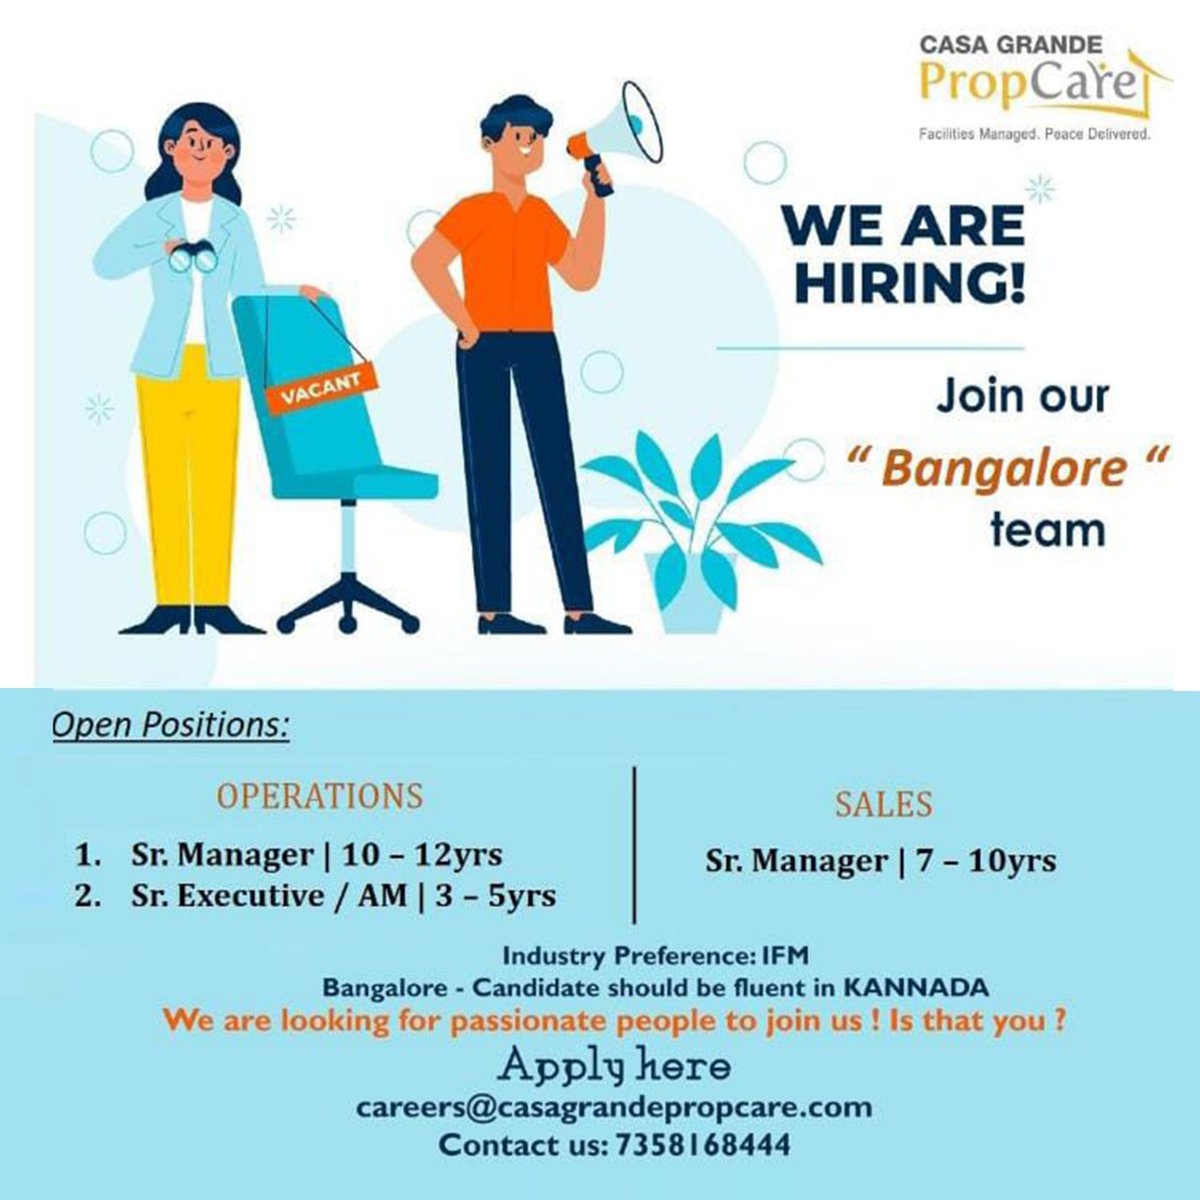 We're HIRING! 
Apply right away if you meet the above requirements, and we'll get in touch with you.
⁣⁣⁣#PropCare #HIRING #HospitalityIndustry #hospitalityjobs #hospitalityart #hospitalitymarketing #hospitalitystaff #hospitalityexperts #hiring #wearehiring